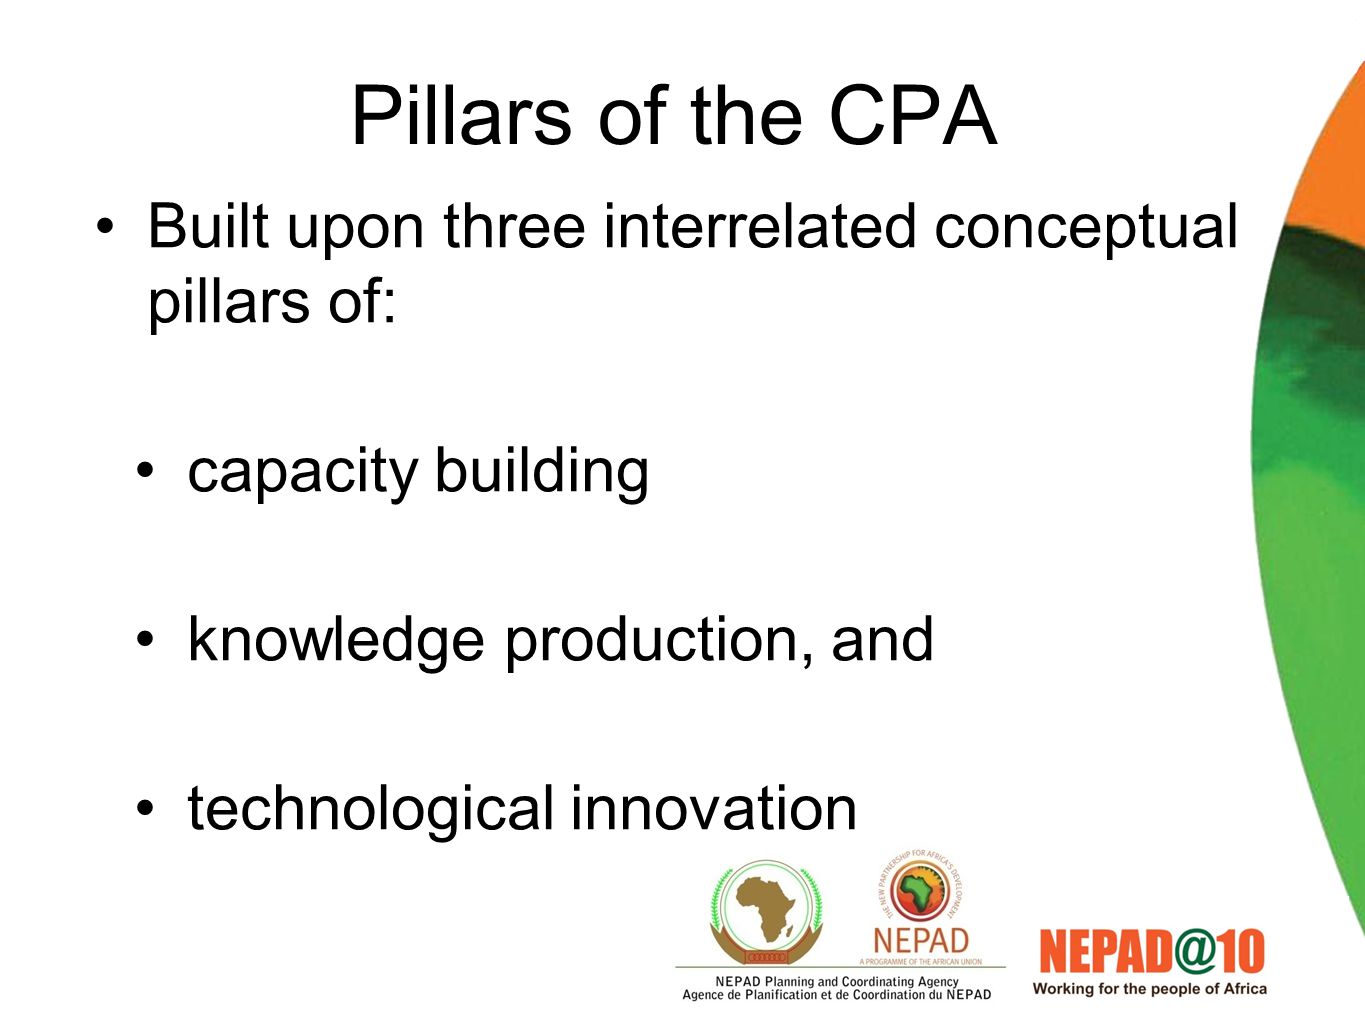 Evolution of the CPA Participatory Evolved from a consultative process –Multi-sectoral stakeholder meetings and conferences at continental and regional level from 2003 to 2005 Approved by the AMCOST in 2005 Endorsed by the AU summit in 2005